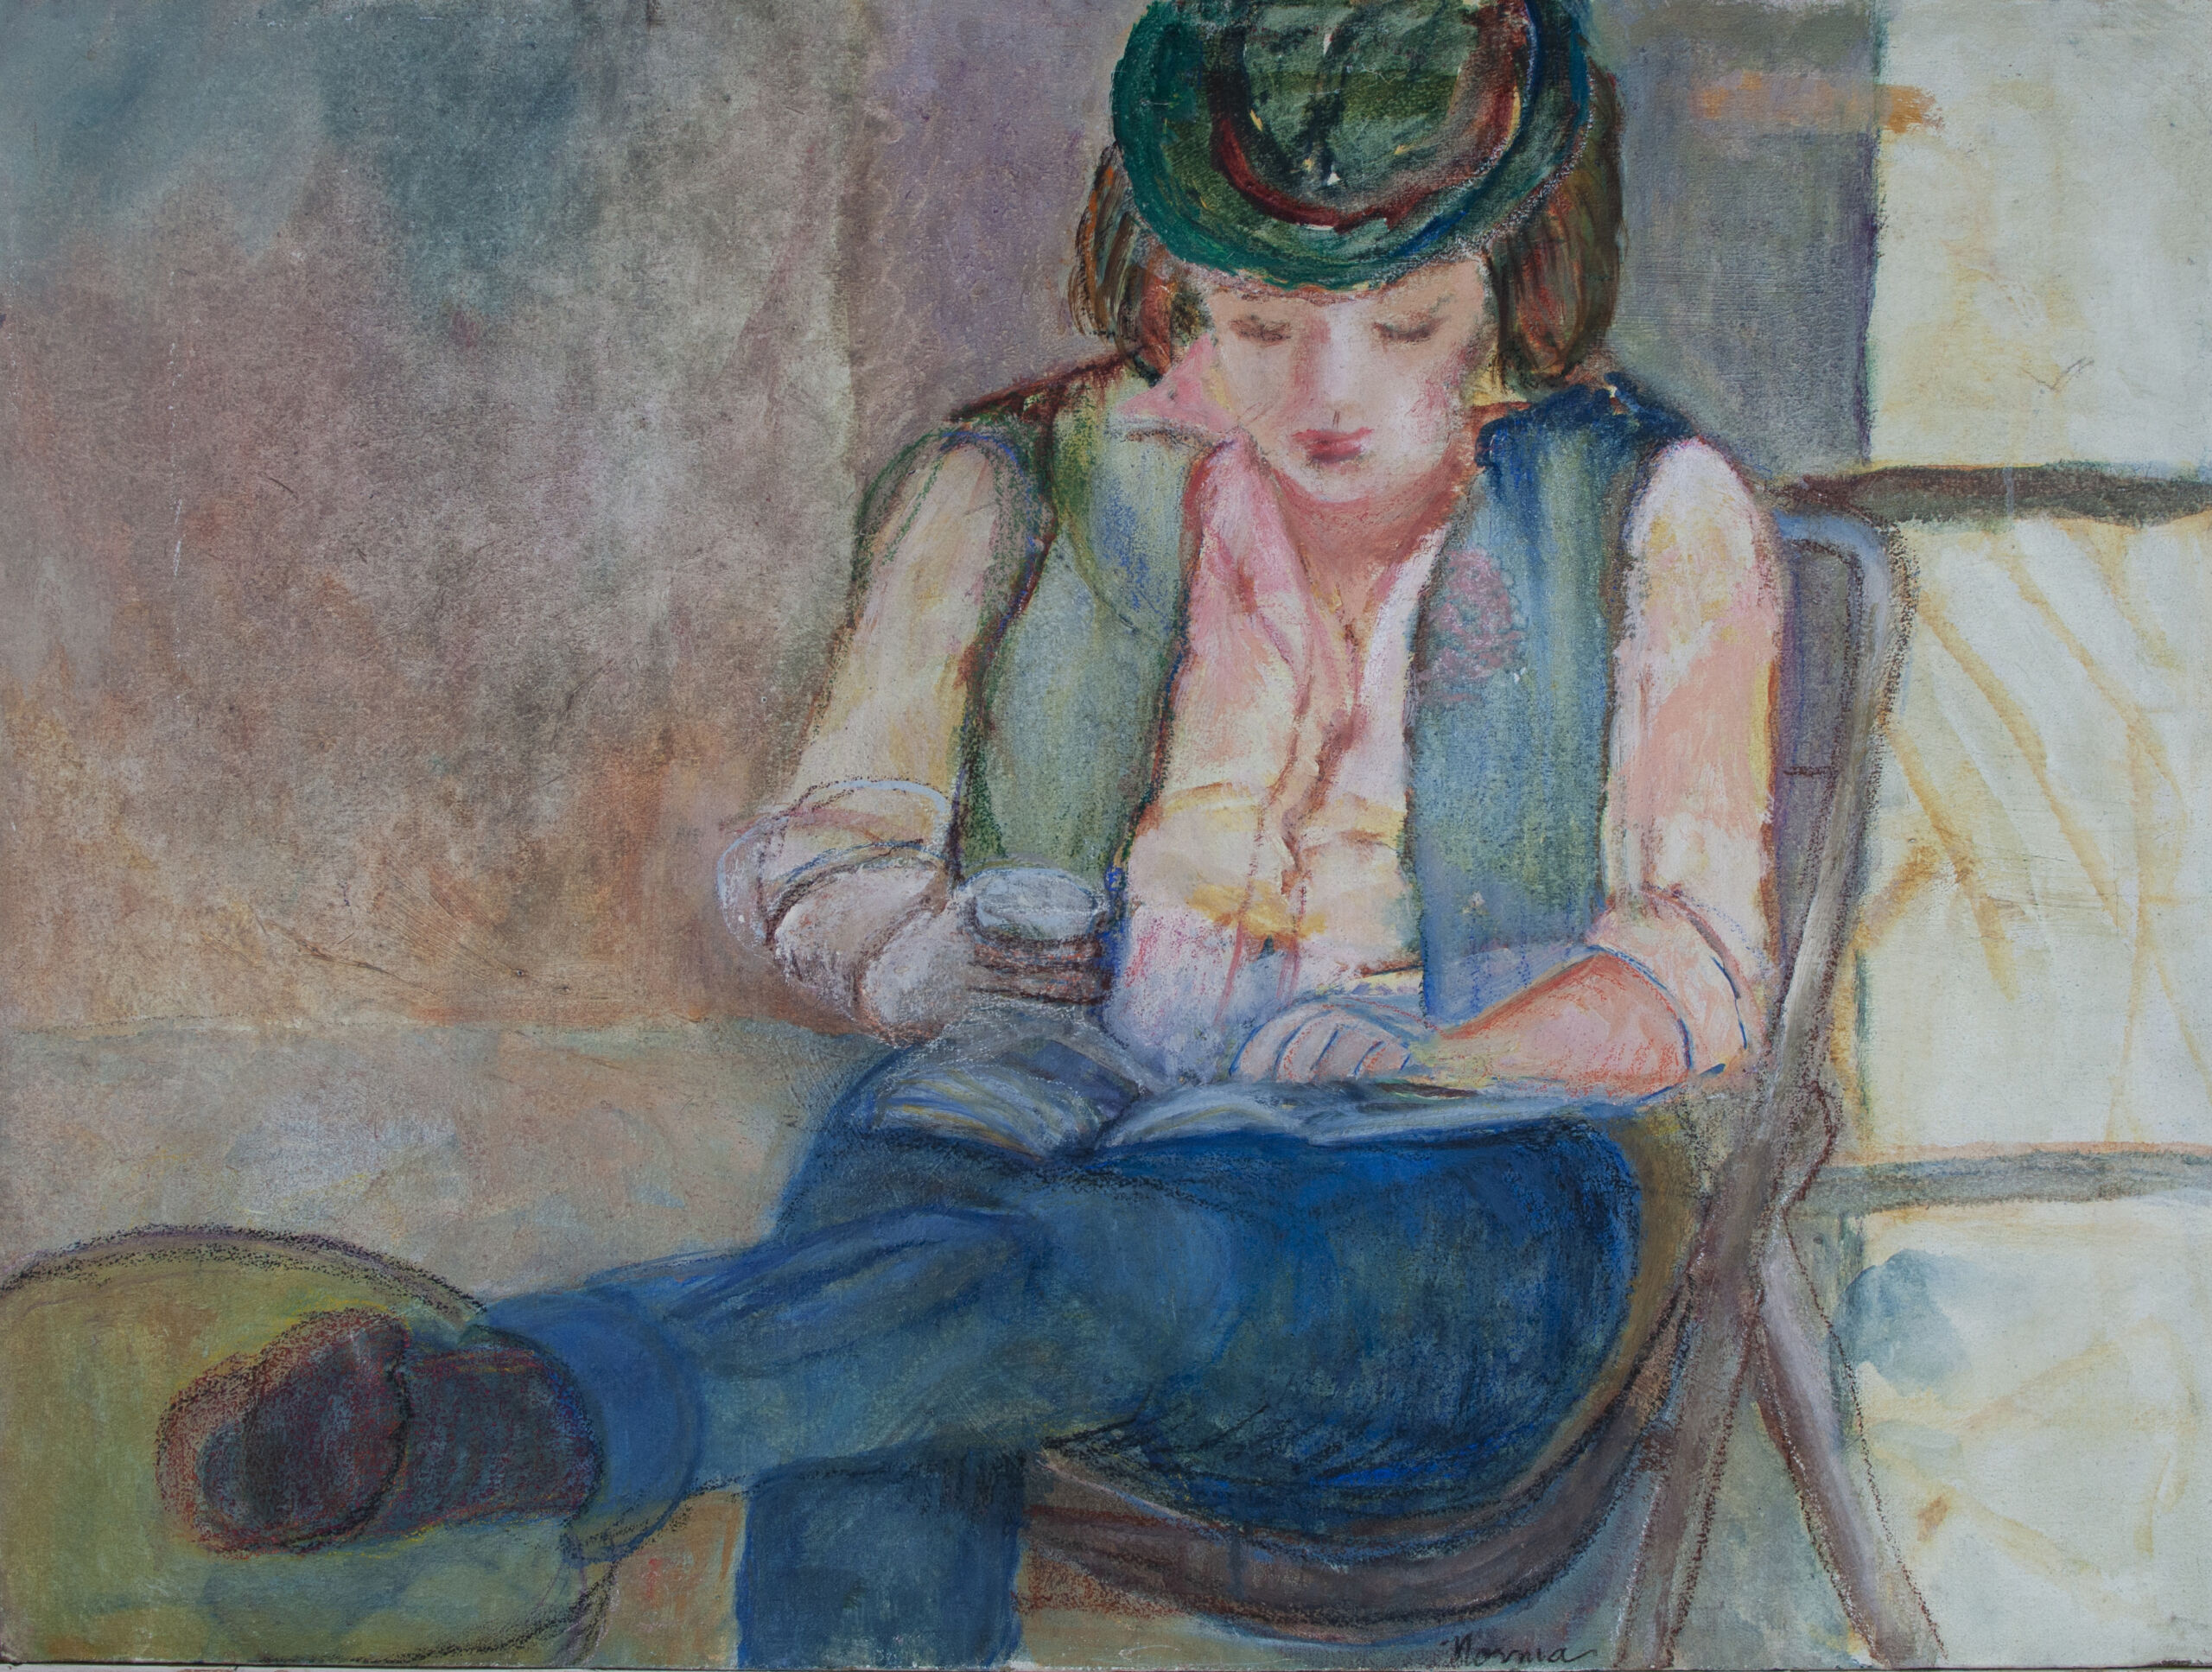 Painting of a white woman wearing a green hat, jeans, a white shirt, and a blue vest sitting on a metal folding chair. She is reading and drinking from a mug.